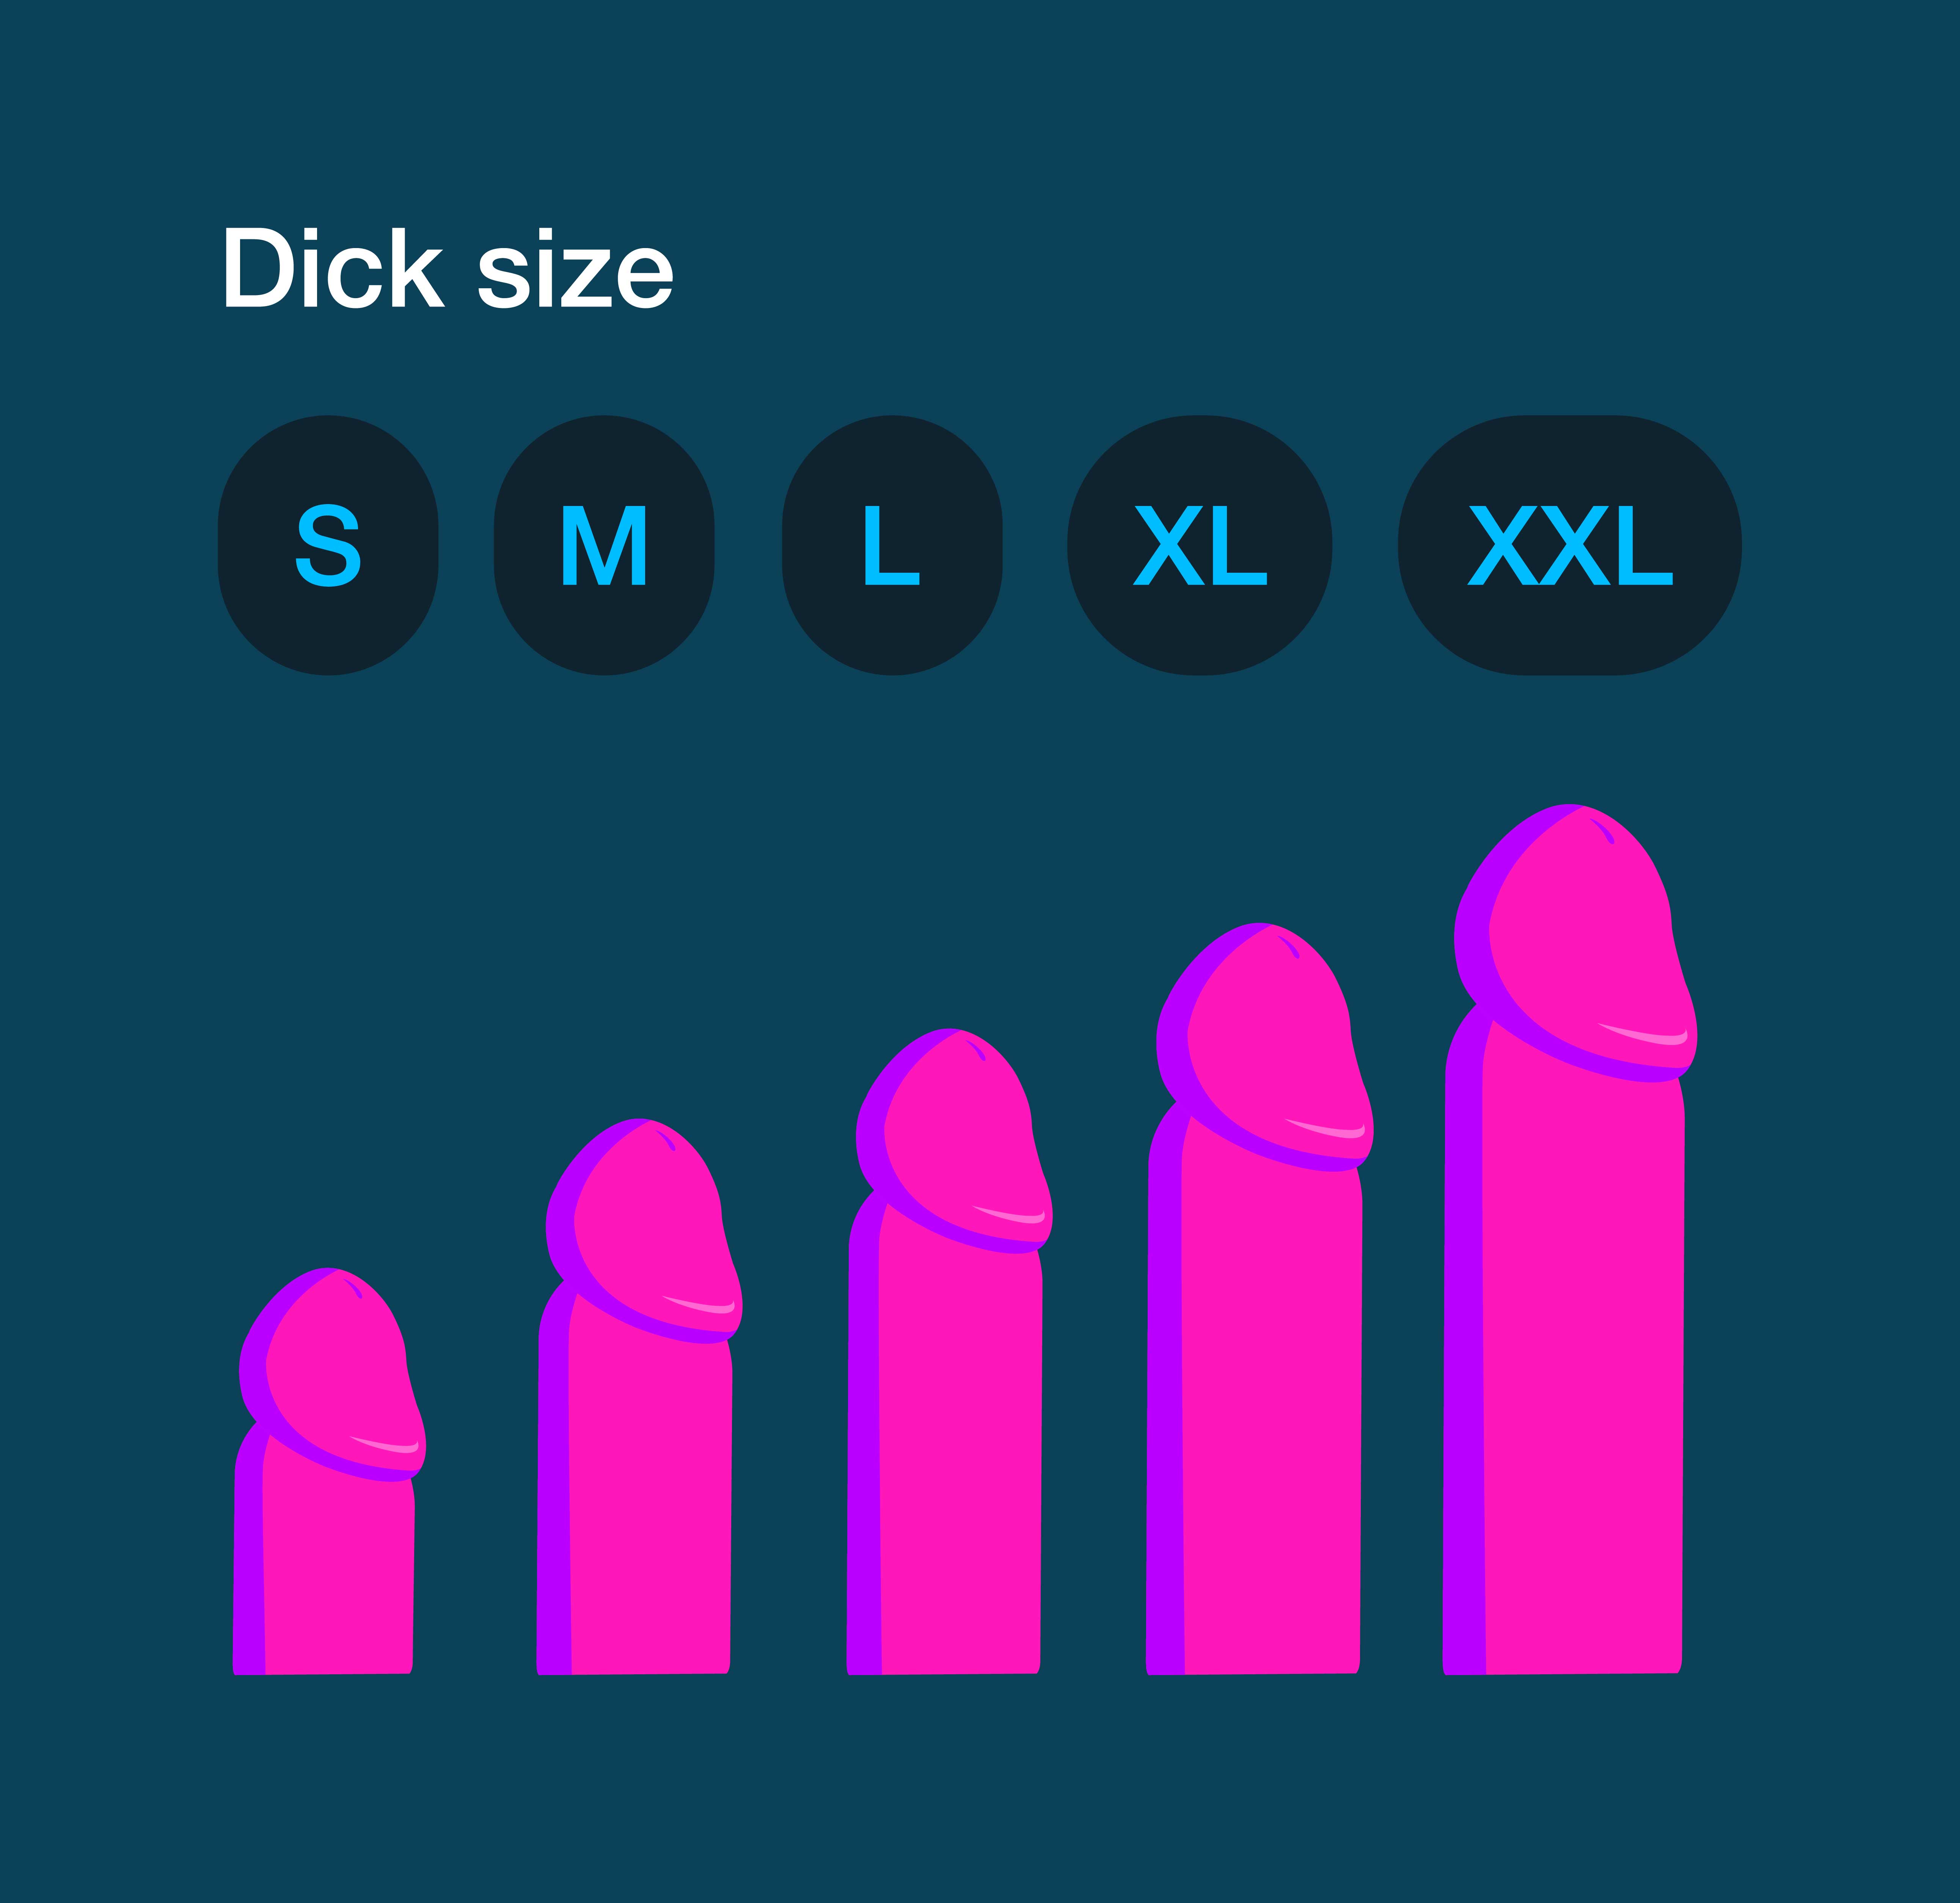 Dick size.